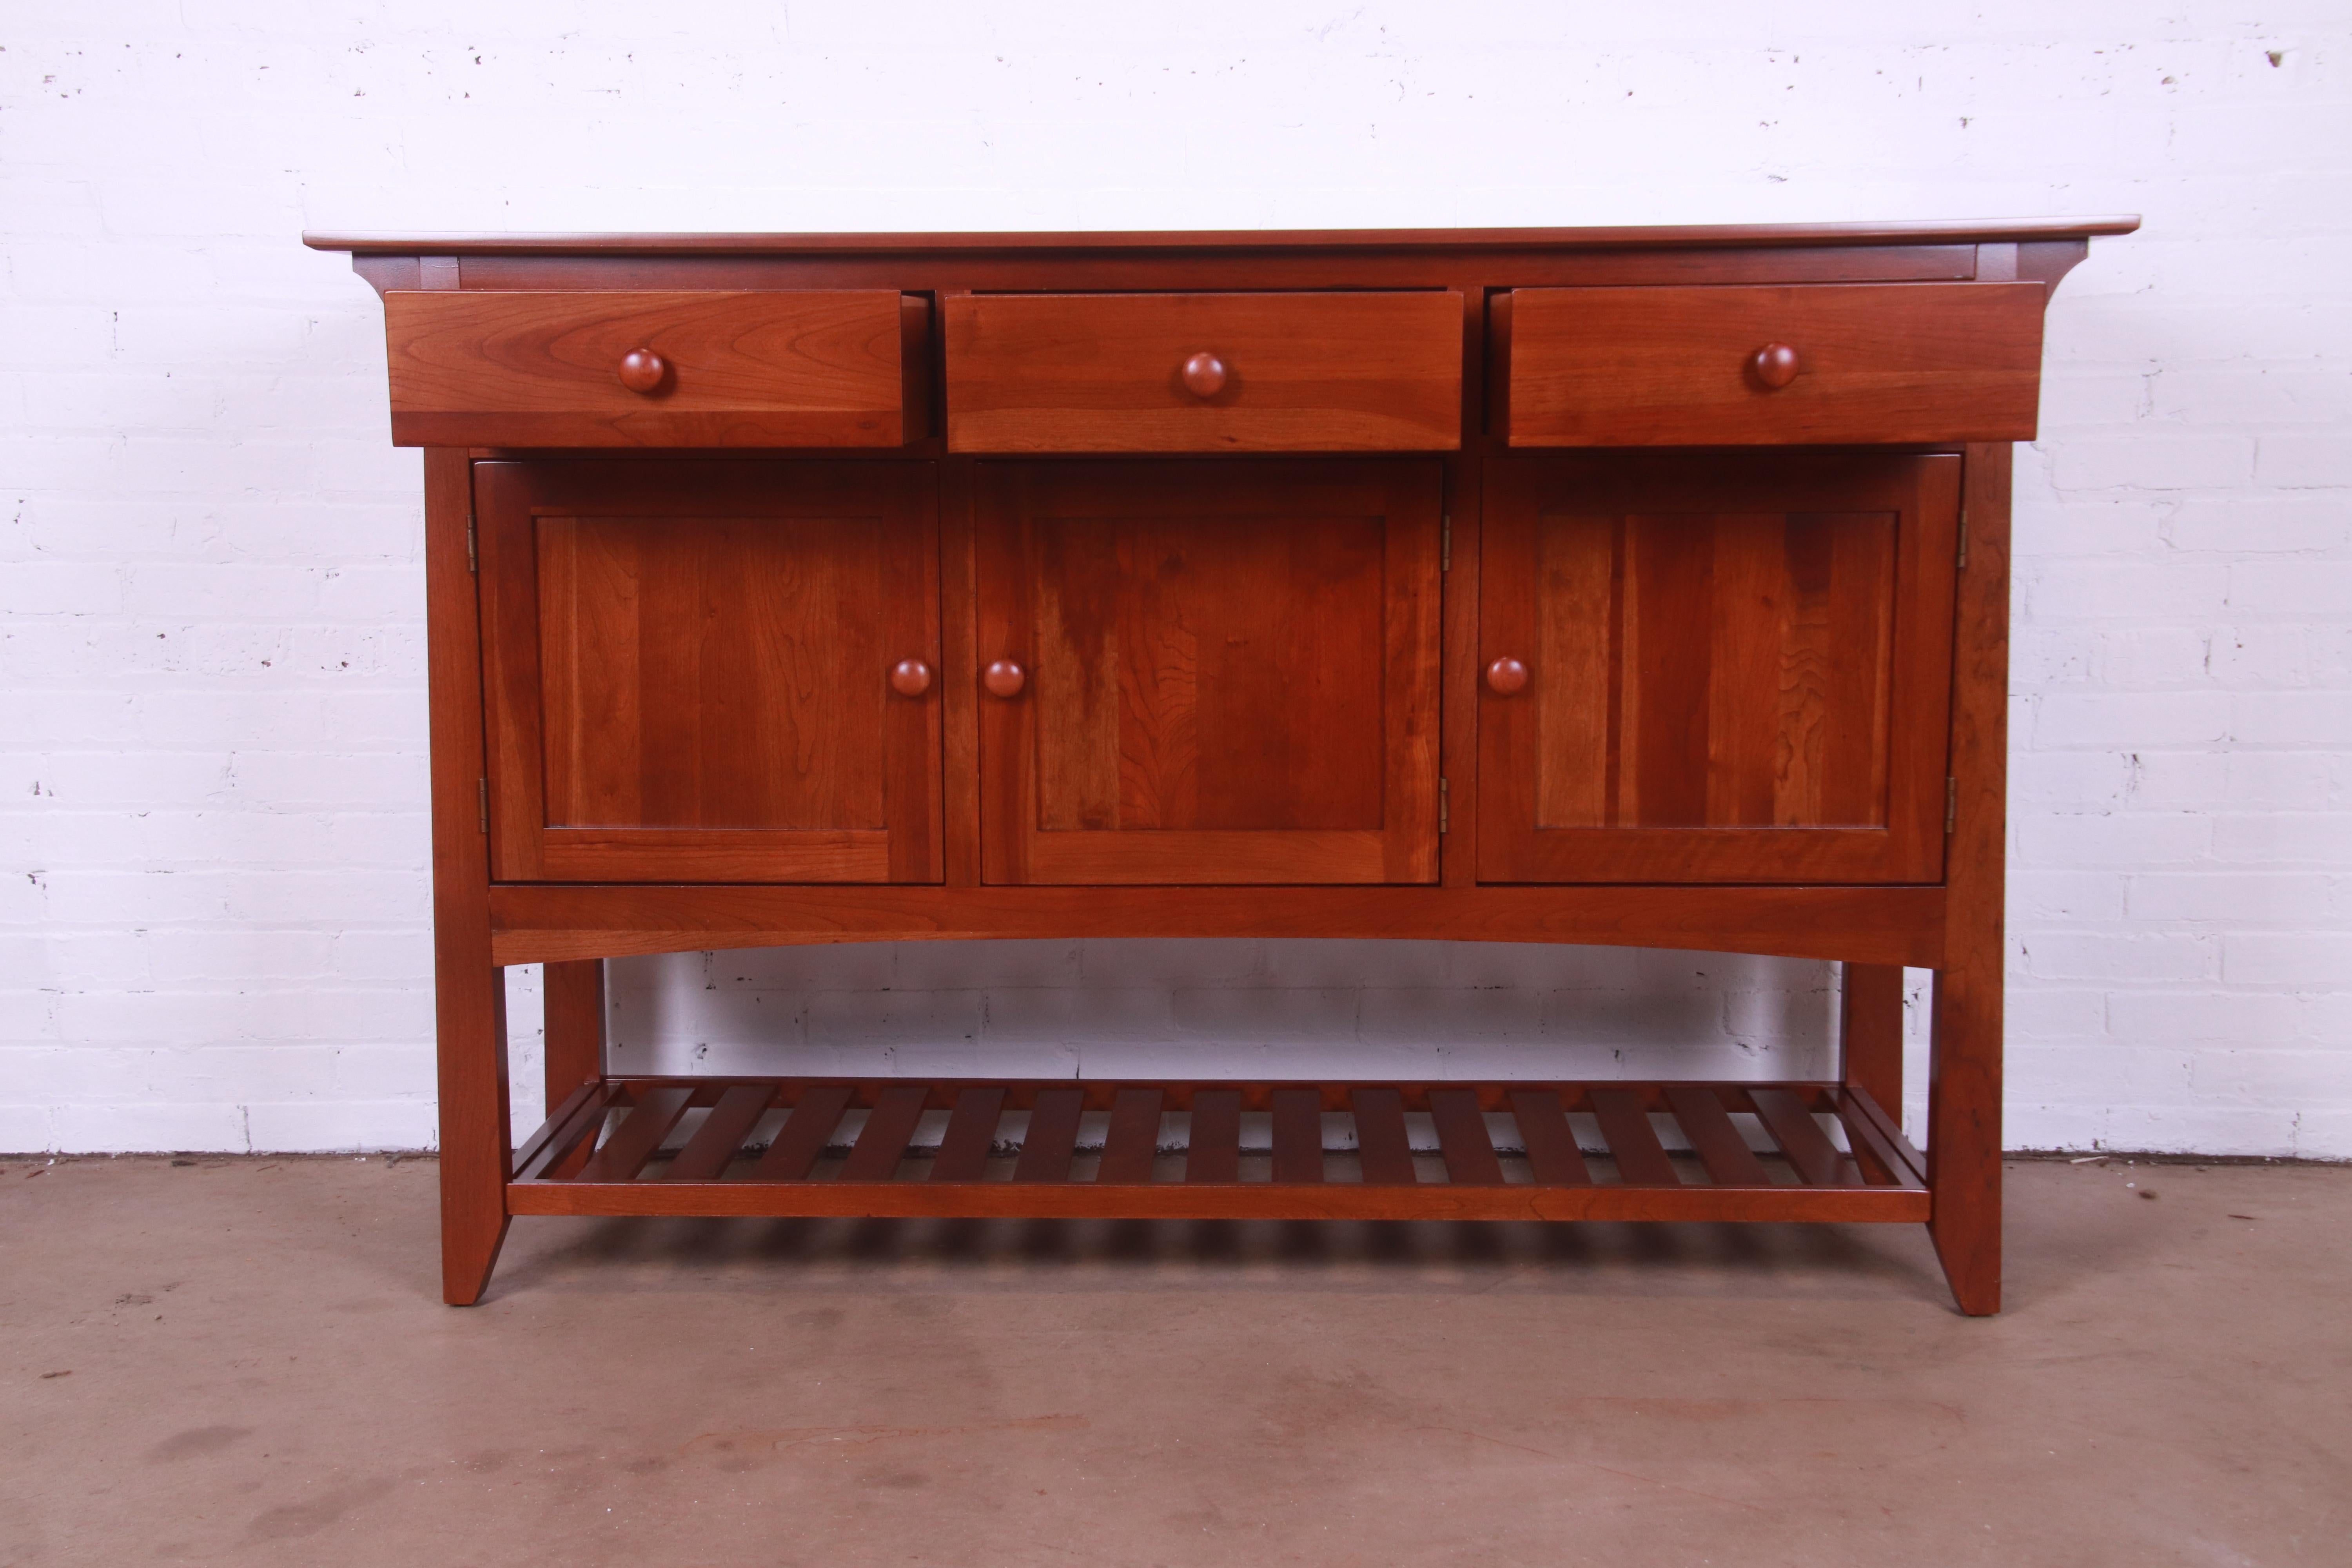 Ethan Allen Arts & Crafts Cherry Wood Sideboard or Bar Cabinet, Newly Refinished 1